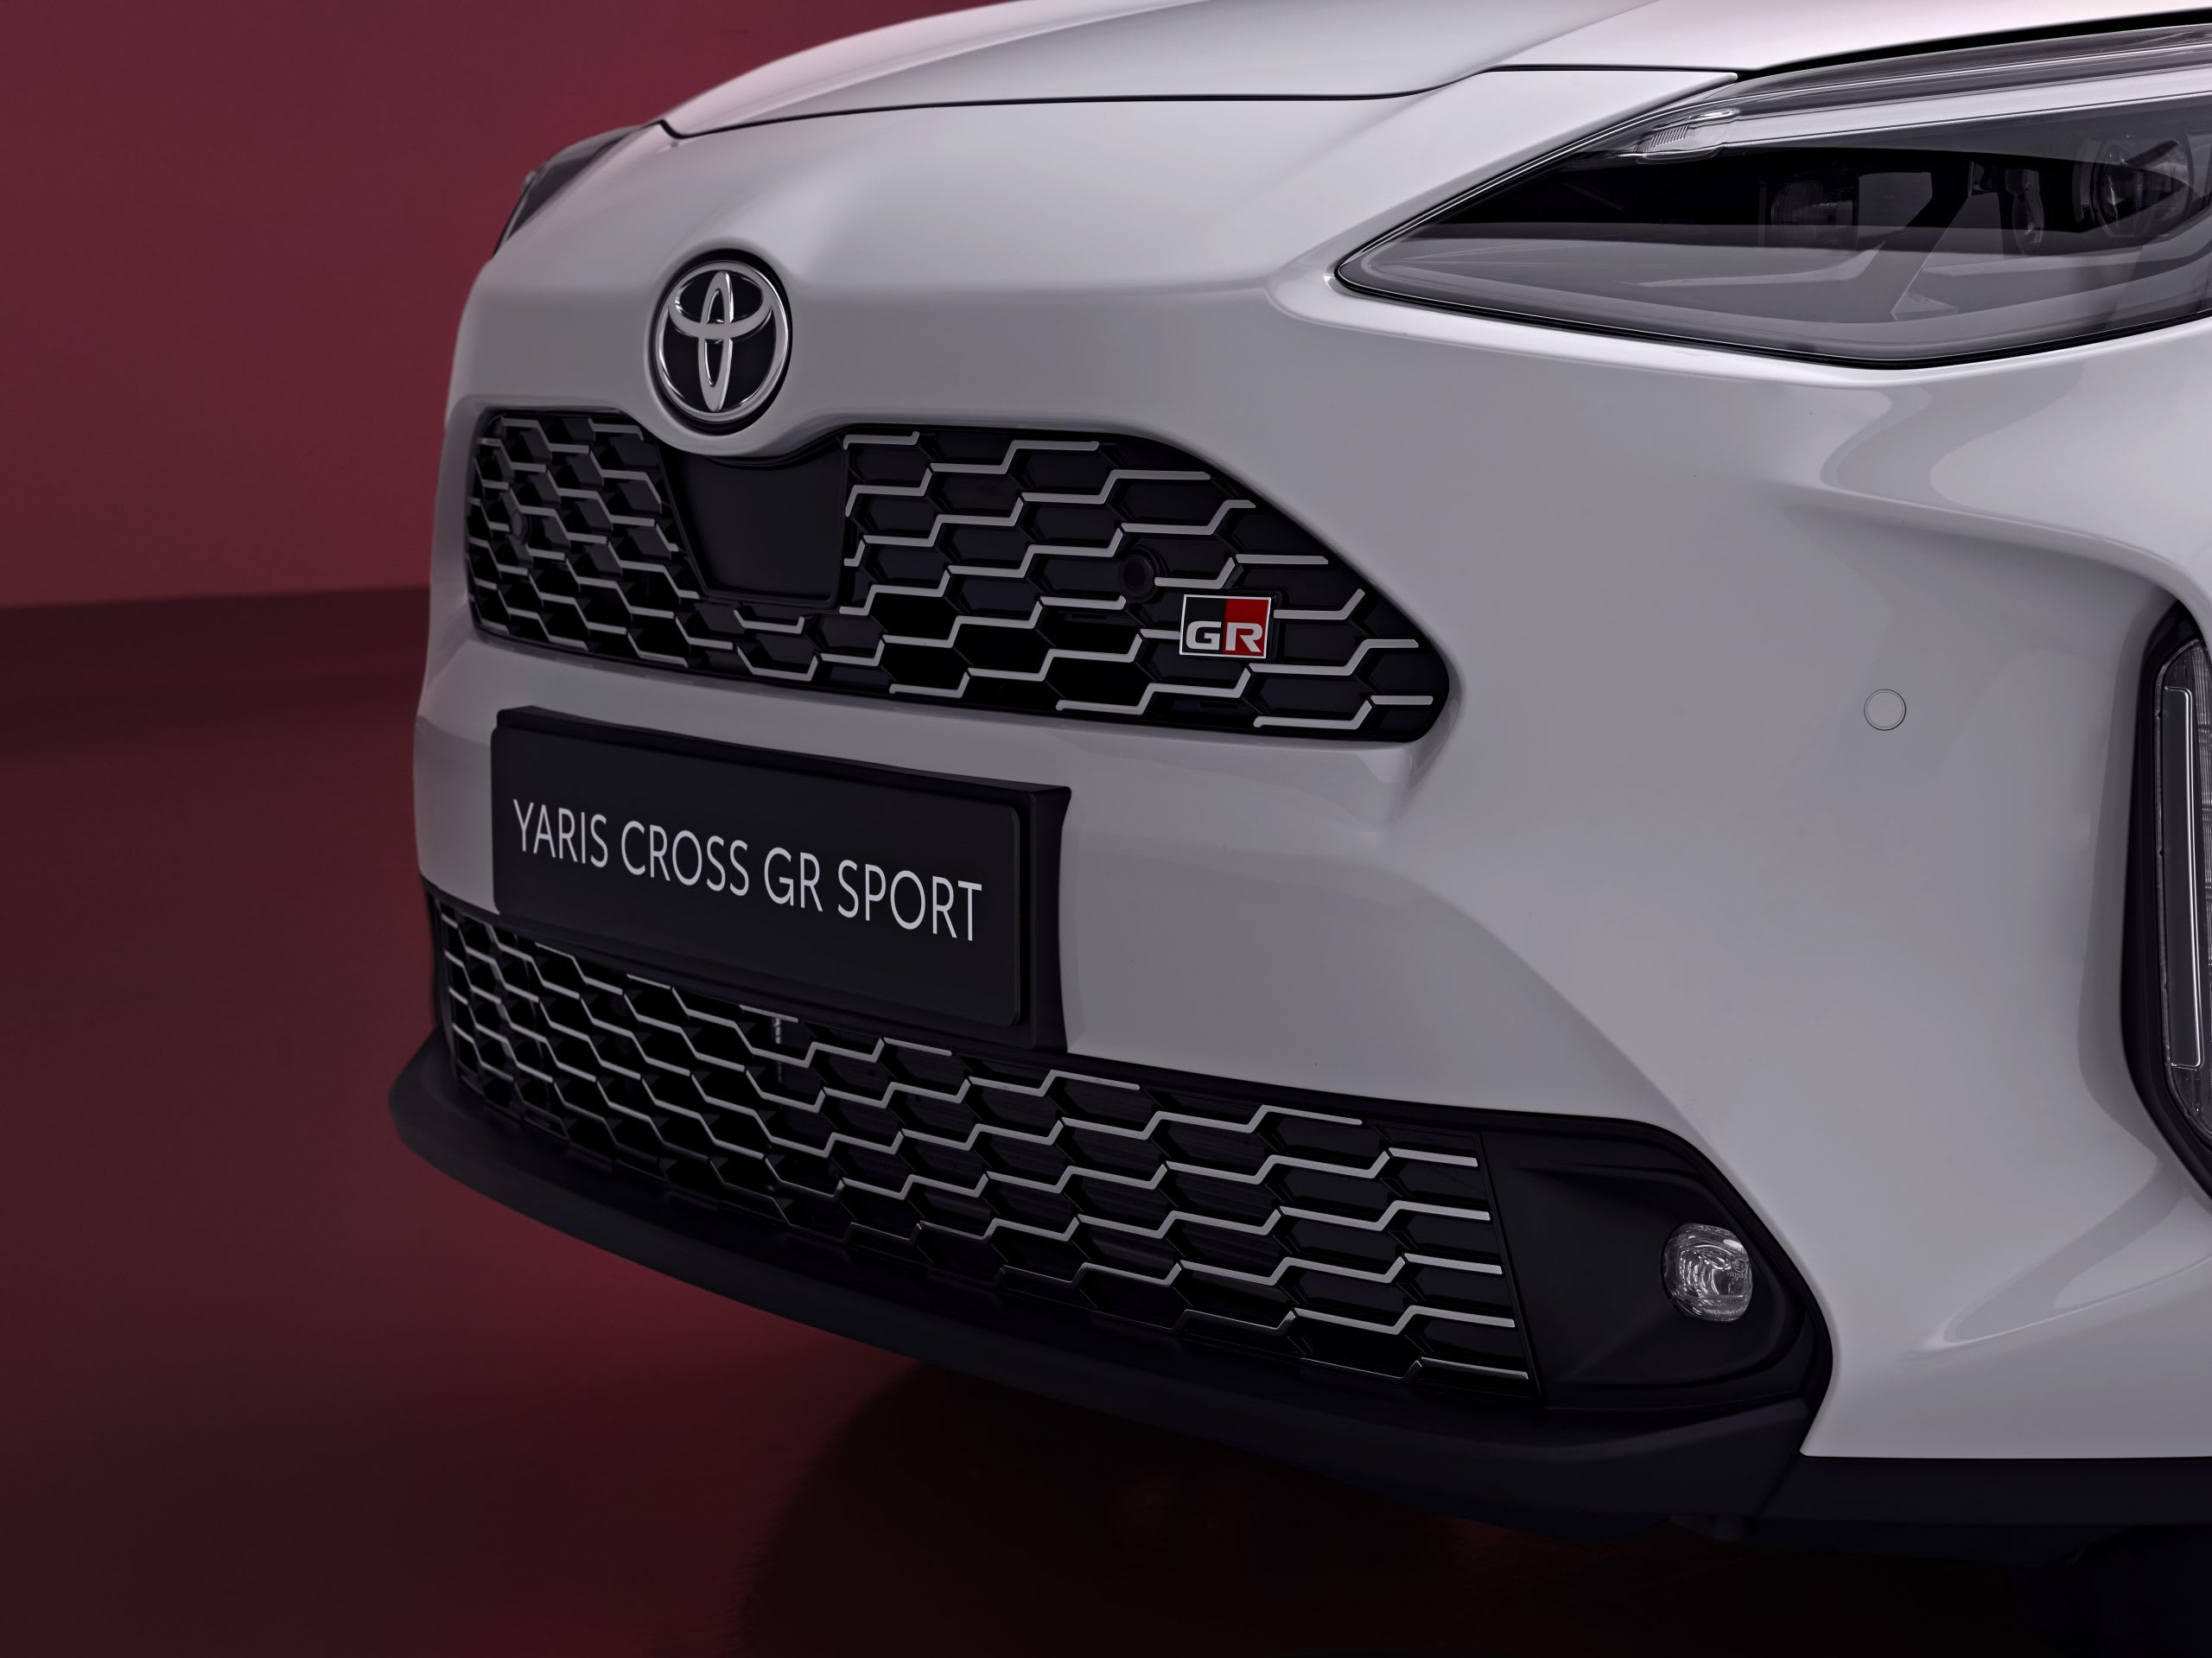 New Toyota Yaris Cross GR Sport delivers performance spirit and